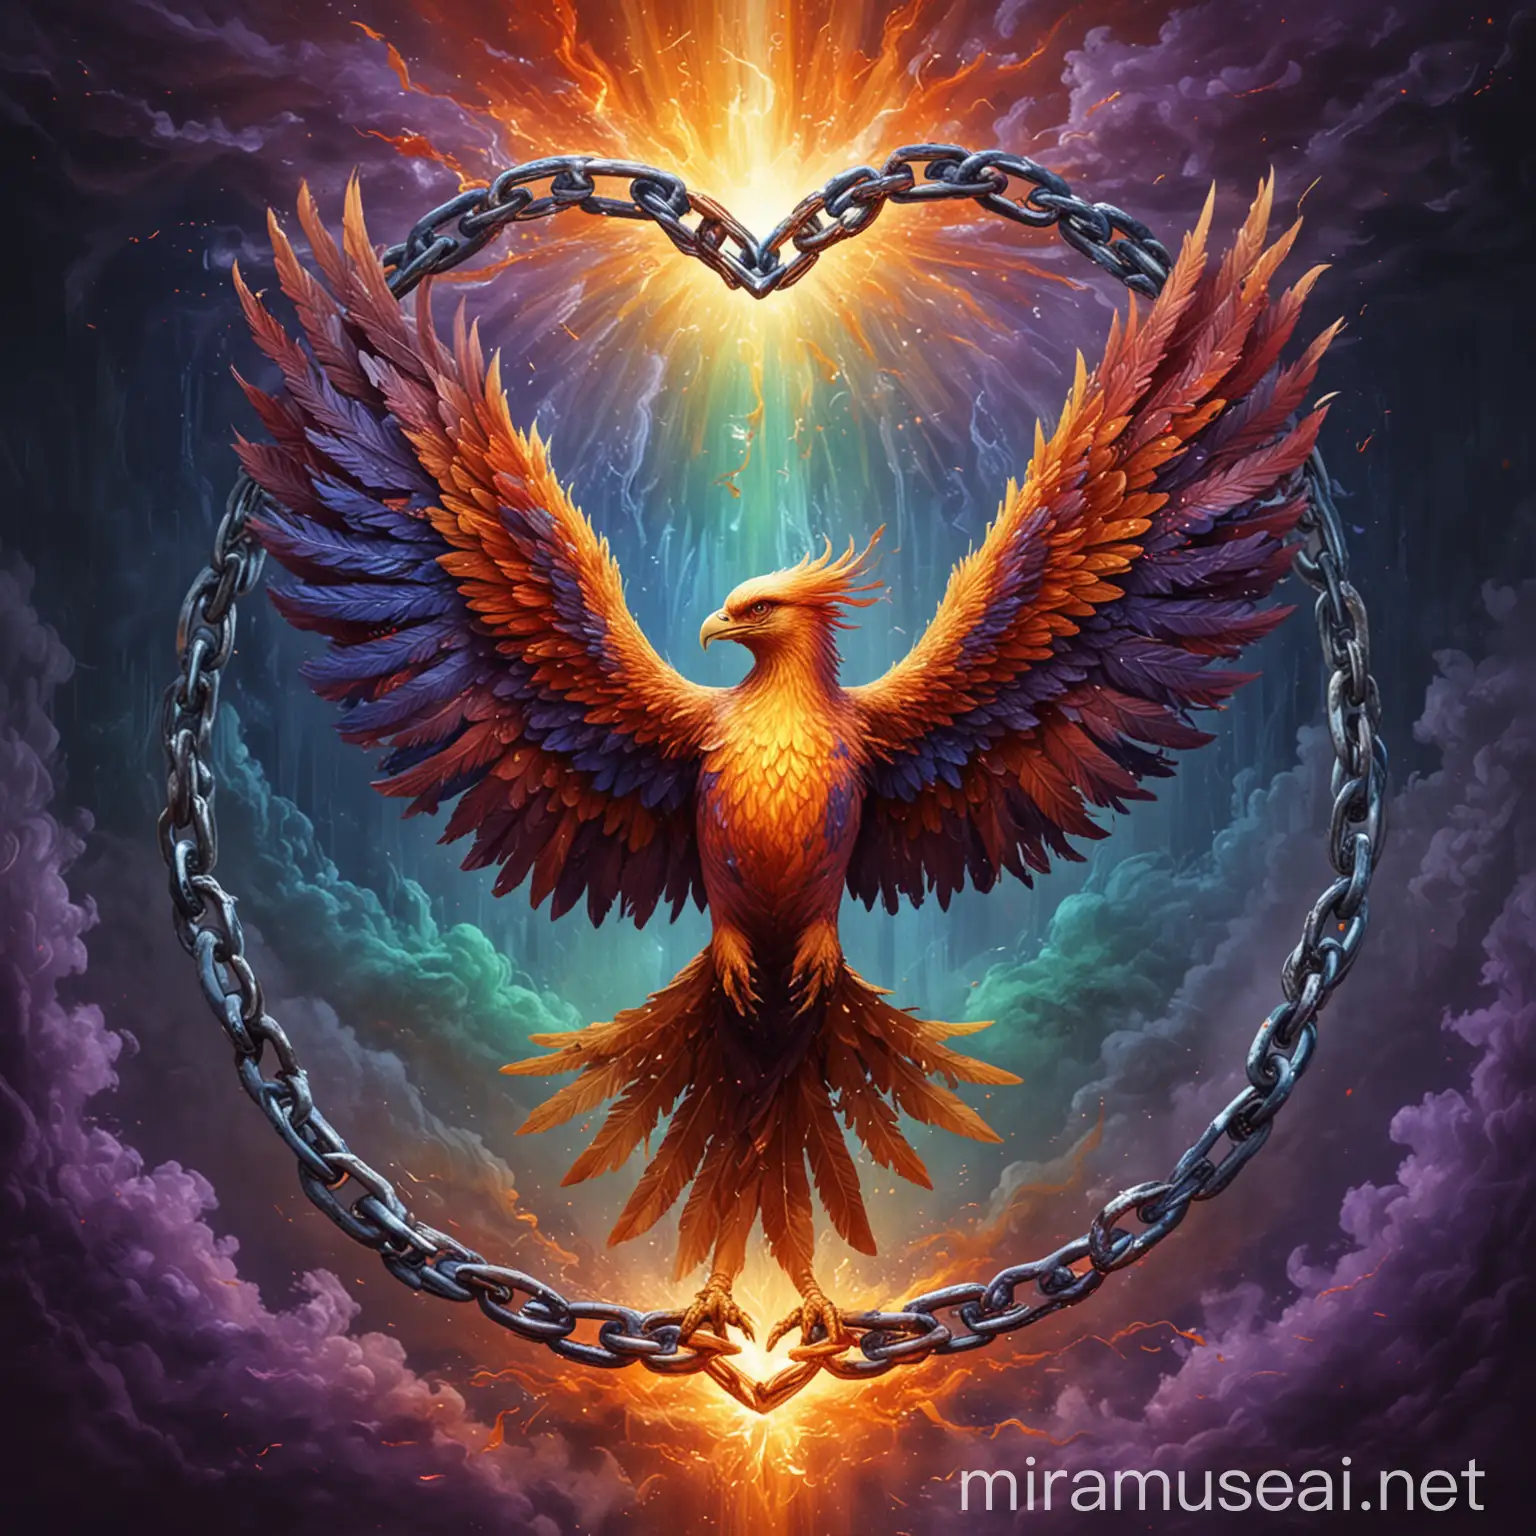 1. Start by selecting an image of a phoenix trapped in the chains of addiction.
2. Using colors and patterns that evoke feelings of hope and freedom, reconstruct a part of the image to depict the phoenix soaring towards liberation.
   - Blue Color: #3498DB
   - Green Color: #2ECC71
   - Orange Color: #F39C12
   - Yellow Color: #F4D03F
   - Red Color: #E74C3C
   - Purple Color: #9B59B6
3. Draw flames of hope and aspiration emanating from the heart of the phoenix, using bright and captivating colors.
   - Yellow Color: #F4D03F
   - Orange Color: #F39C12
   - Red Color: #E74C3C
   - Purple Color: #9B59B6
   - Dark Blue Color: #34495E
   - Dark Green Color: #229954
4. Alongside the image, write short and inspirational sentences conveying a message of freedom and transformation to the viewers.
   - Broken Chain Pattern: #000000 (Black)
   - Silver Chain Pattern: #BDC3C7
   - Dark Blue Pattern: #34495E
   - Brown Pattern: #8B4513
   - Copper Pattern: #B87333
   - Gold Pattern: #DC7633
5. Finally, combine the image and text, creating a beautiful and inspiring media journal entry.
